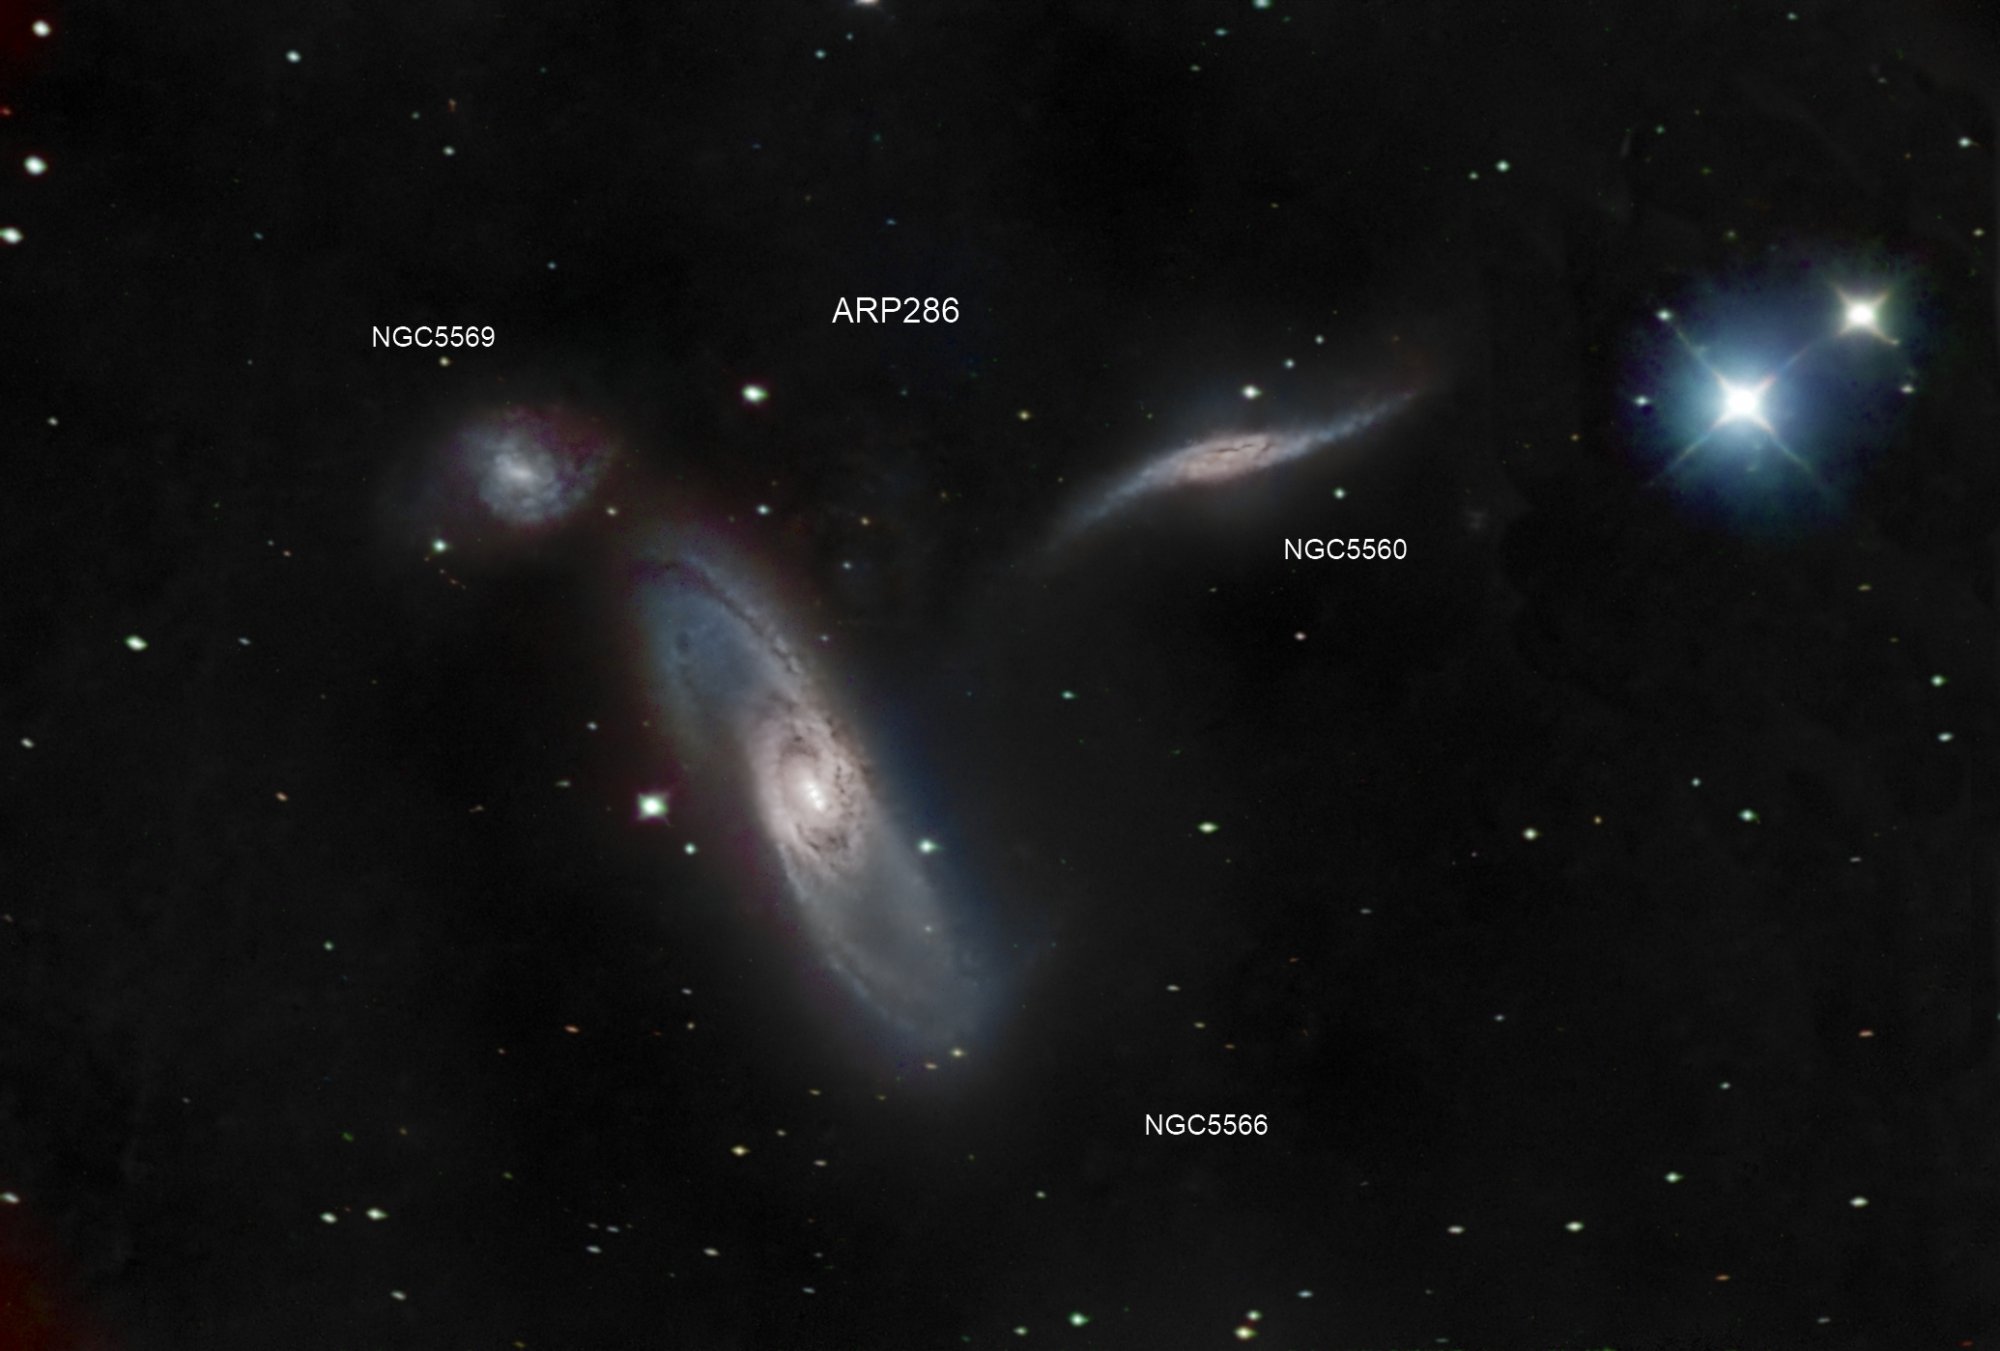 Arp 286, with NGC5560